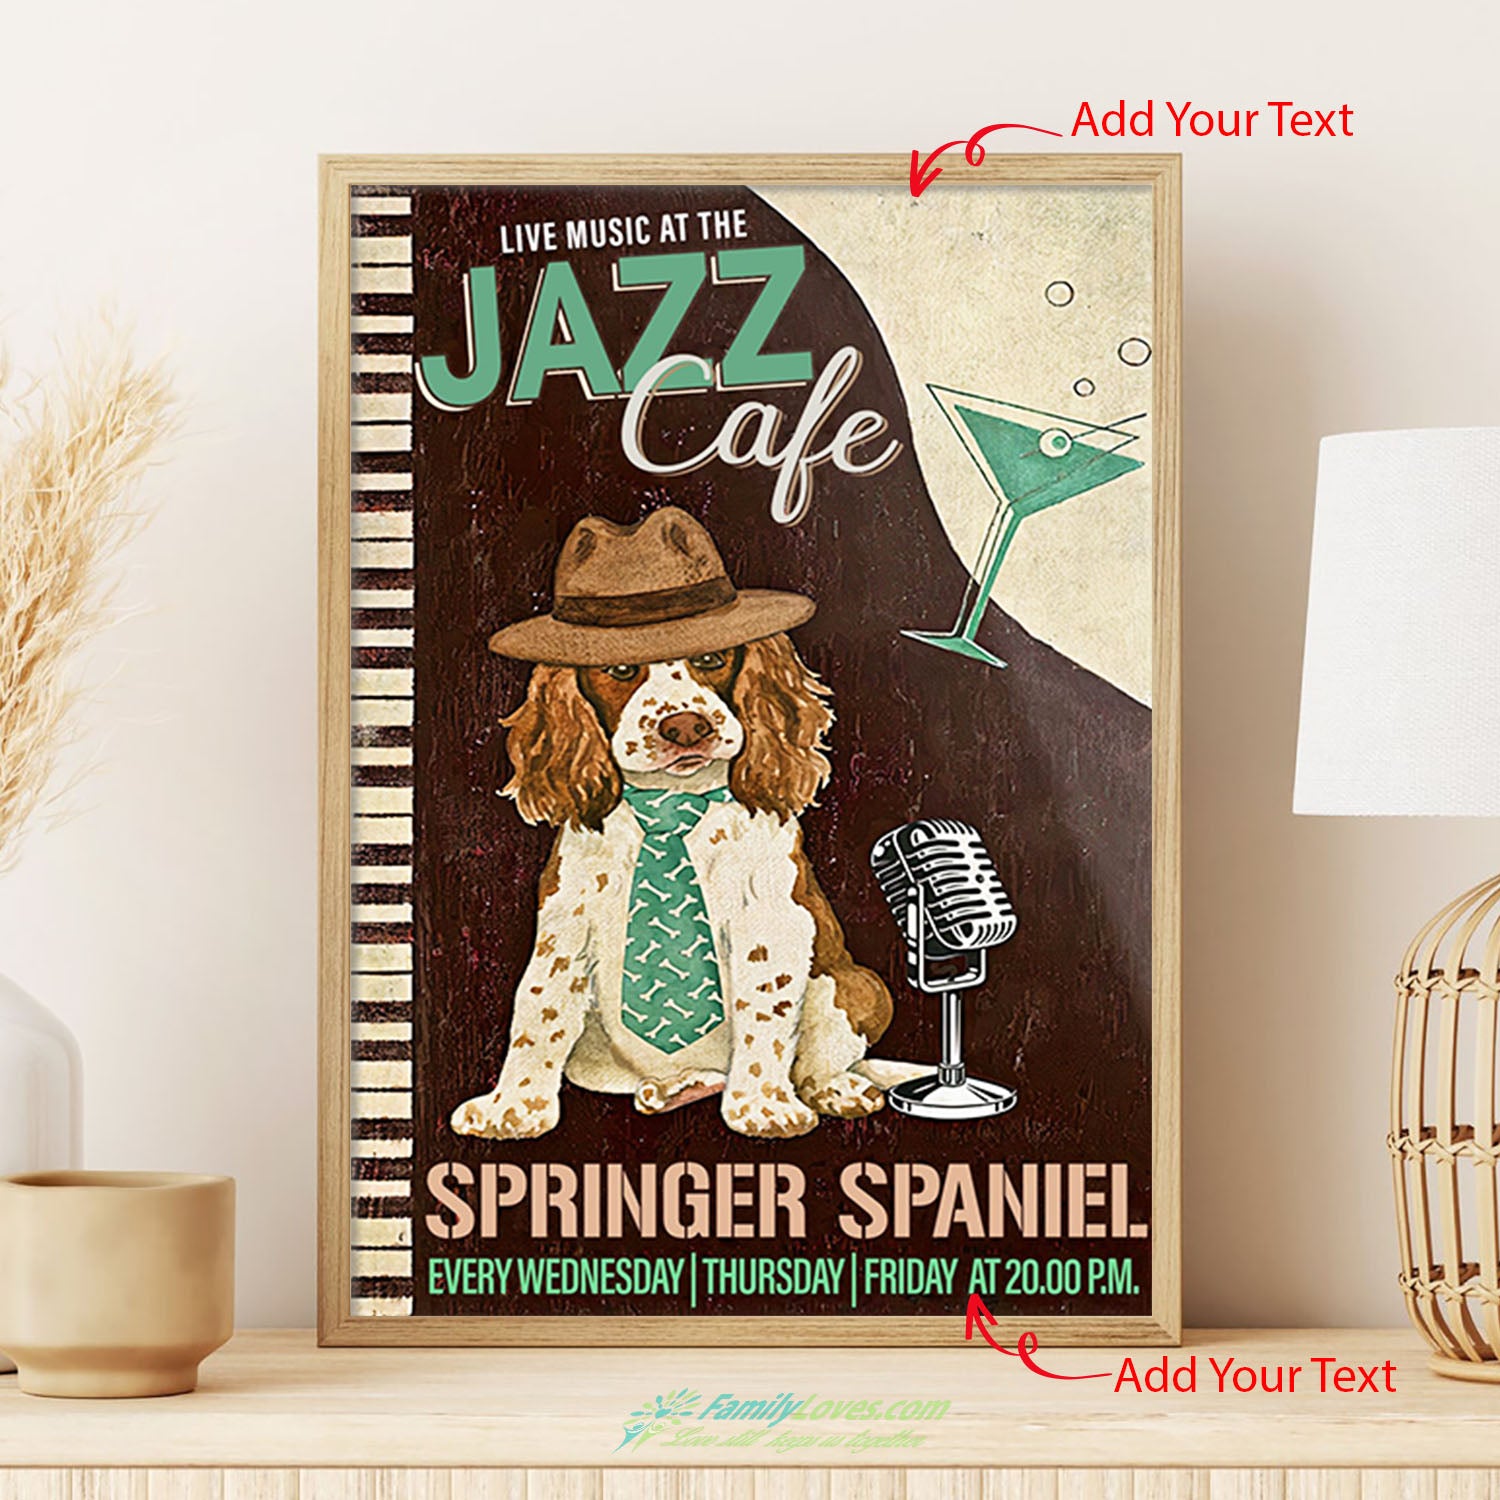 Live Music At The Jazz Cafe Springer Spaniel Canvases For Painting Poster Display All Size 1